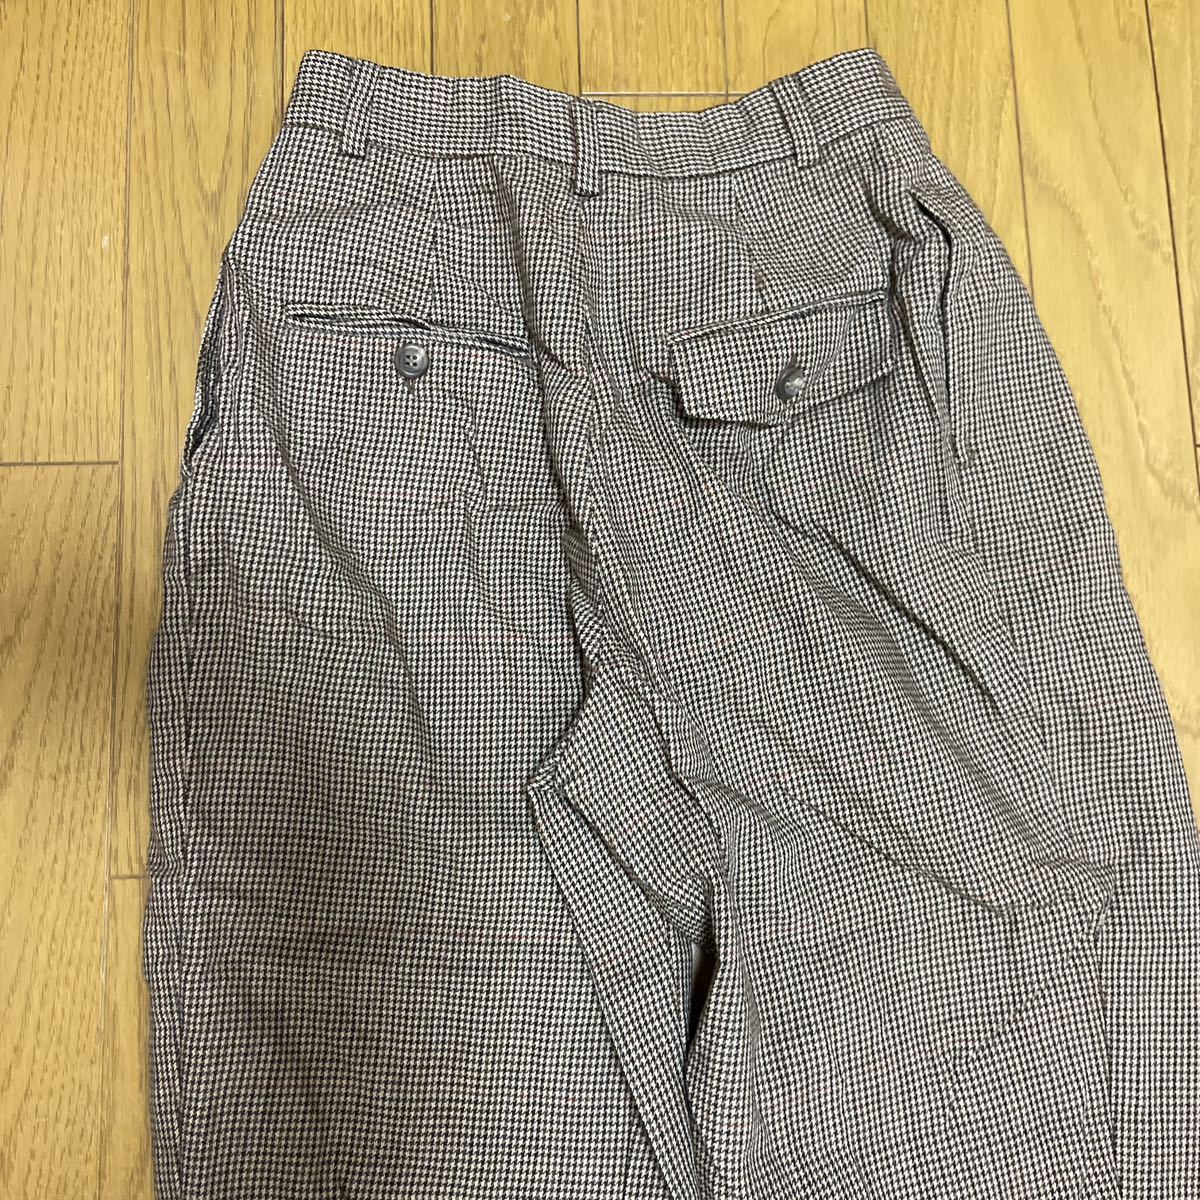  free shipping #Ralph Lauren Ralph Lauren wool Brown check tuck pants size 8 US old clothes 